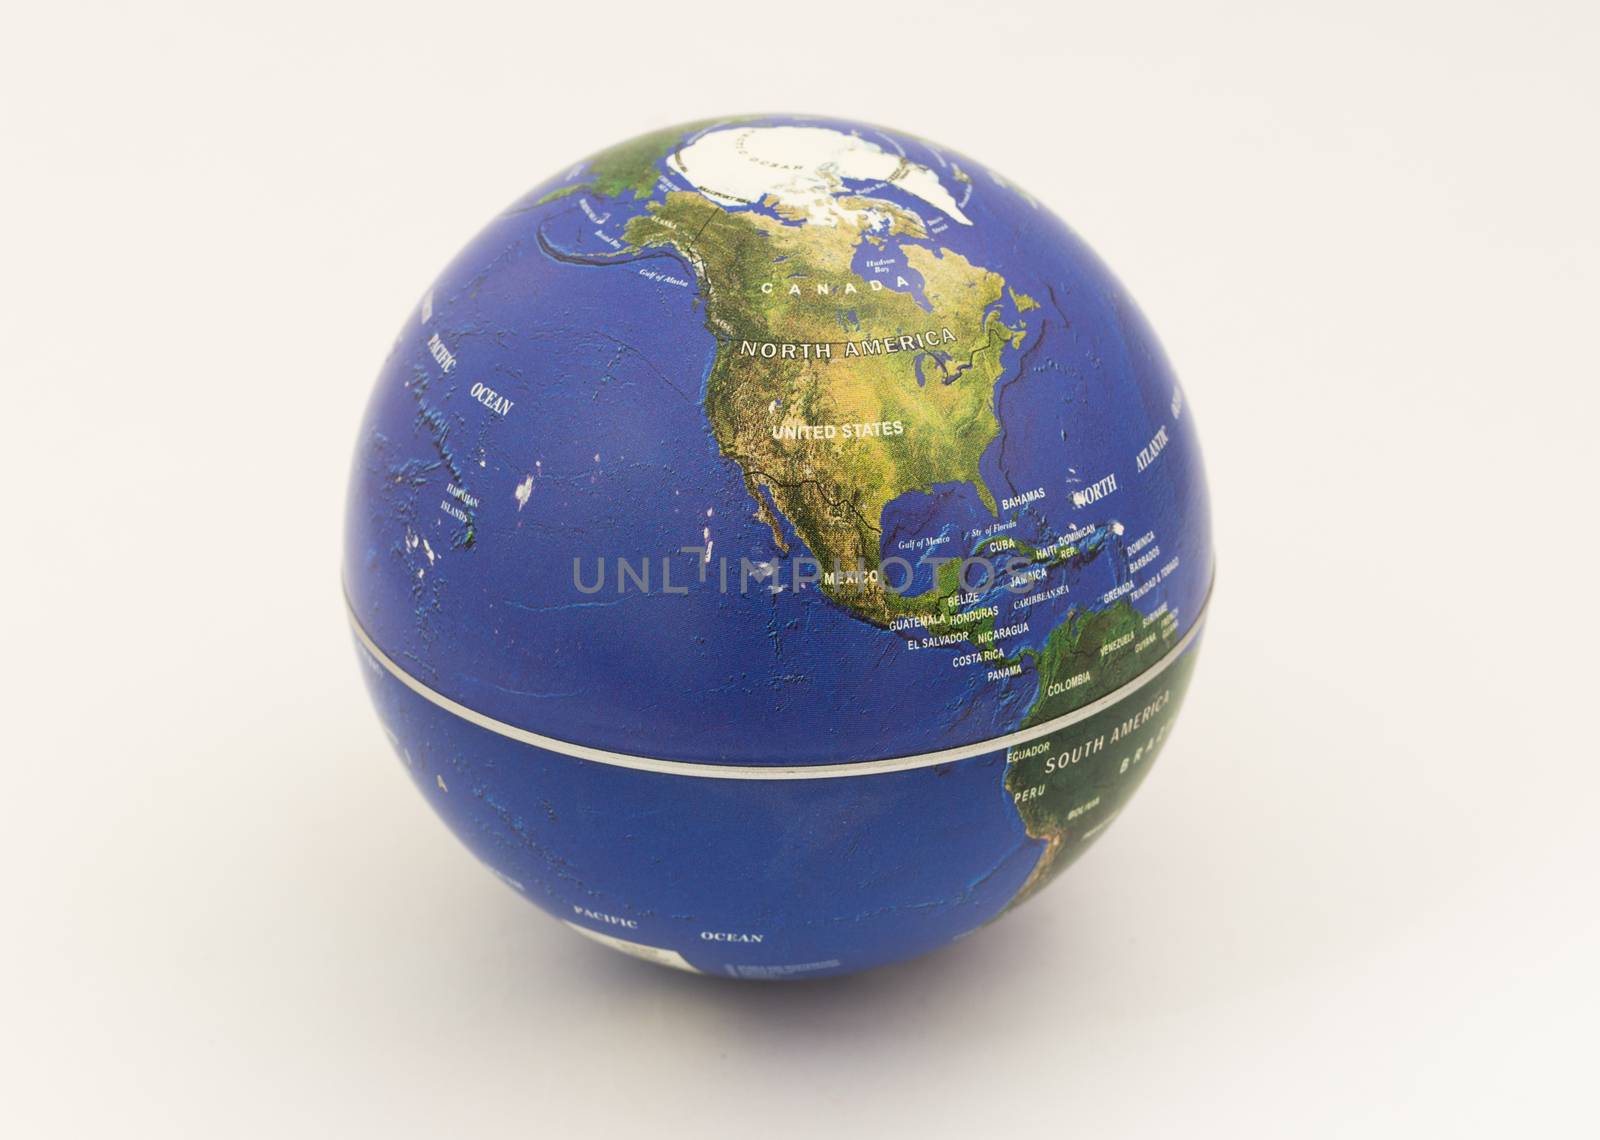 Small globe showing north america and the pacific ocean